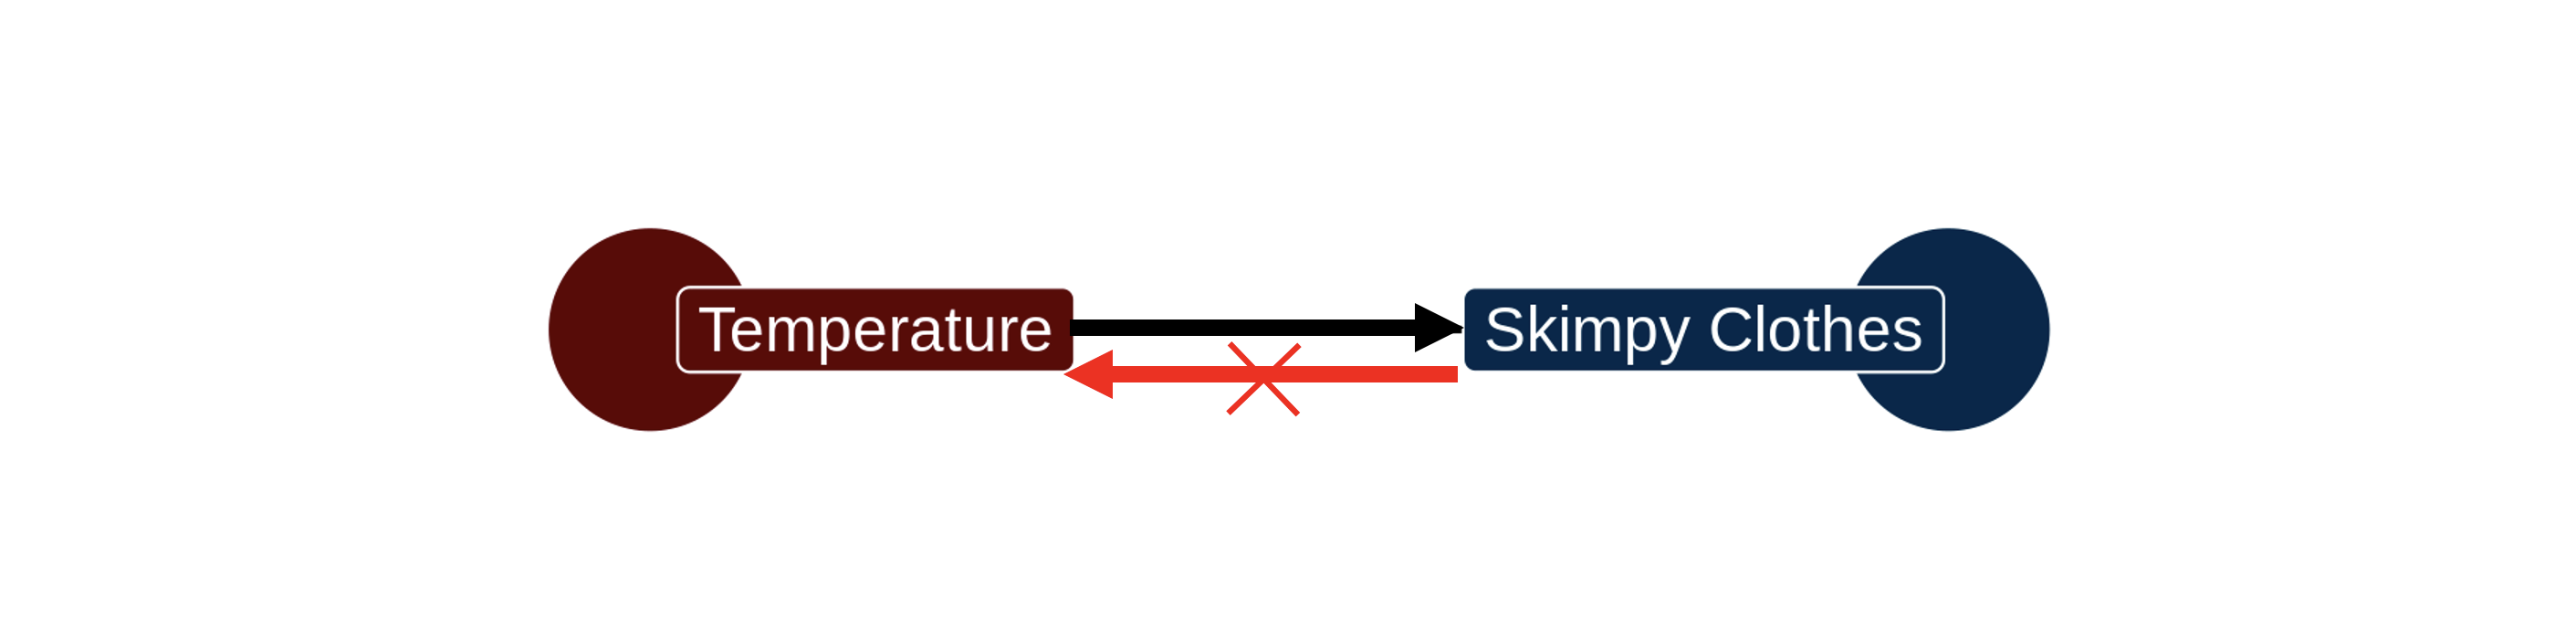 On the left, a circle labeled Temperature with an arrow pointing from it to a circle on the right labeled as Skimpy Clothes. A red arrow is also point from the Skimpy Clothes circle to the Temperature circle, but has an X over it to show that there is no causal connection in that direction.